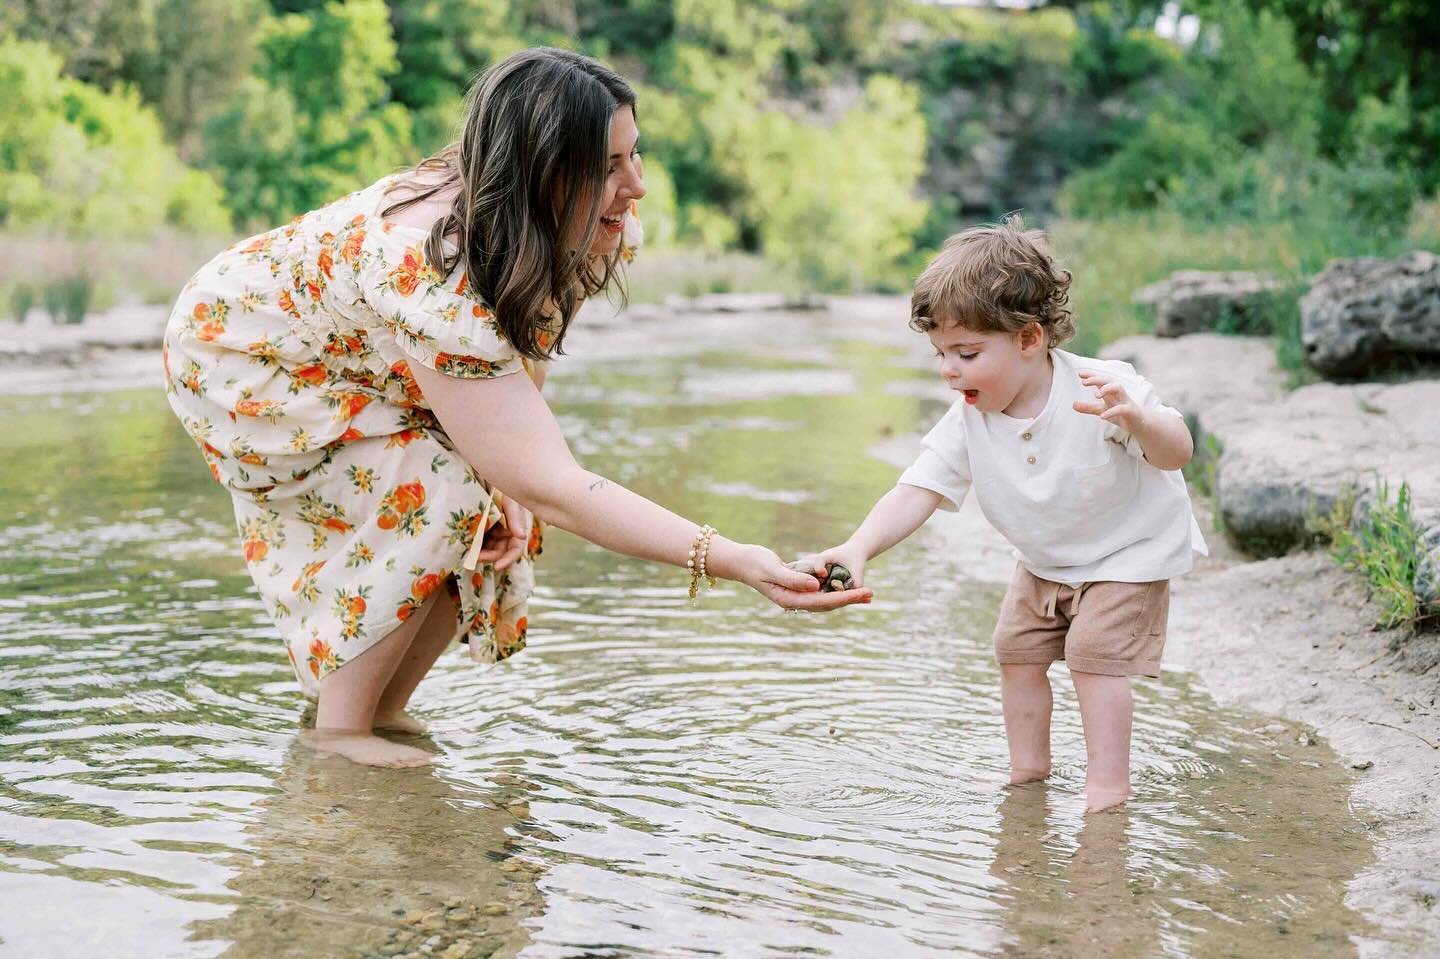 I&rsquo;ve felt so privileged to photograph some of the sweetest moments this spring. I still have a few spots left for outdoor and studio Motherhood Mini sessions this weekend! 

///

#austinfamilyphotographer #austinlifestylephotographer #austinpho